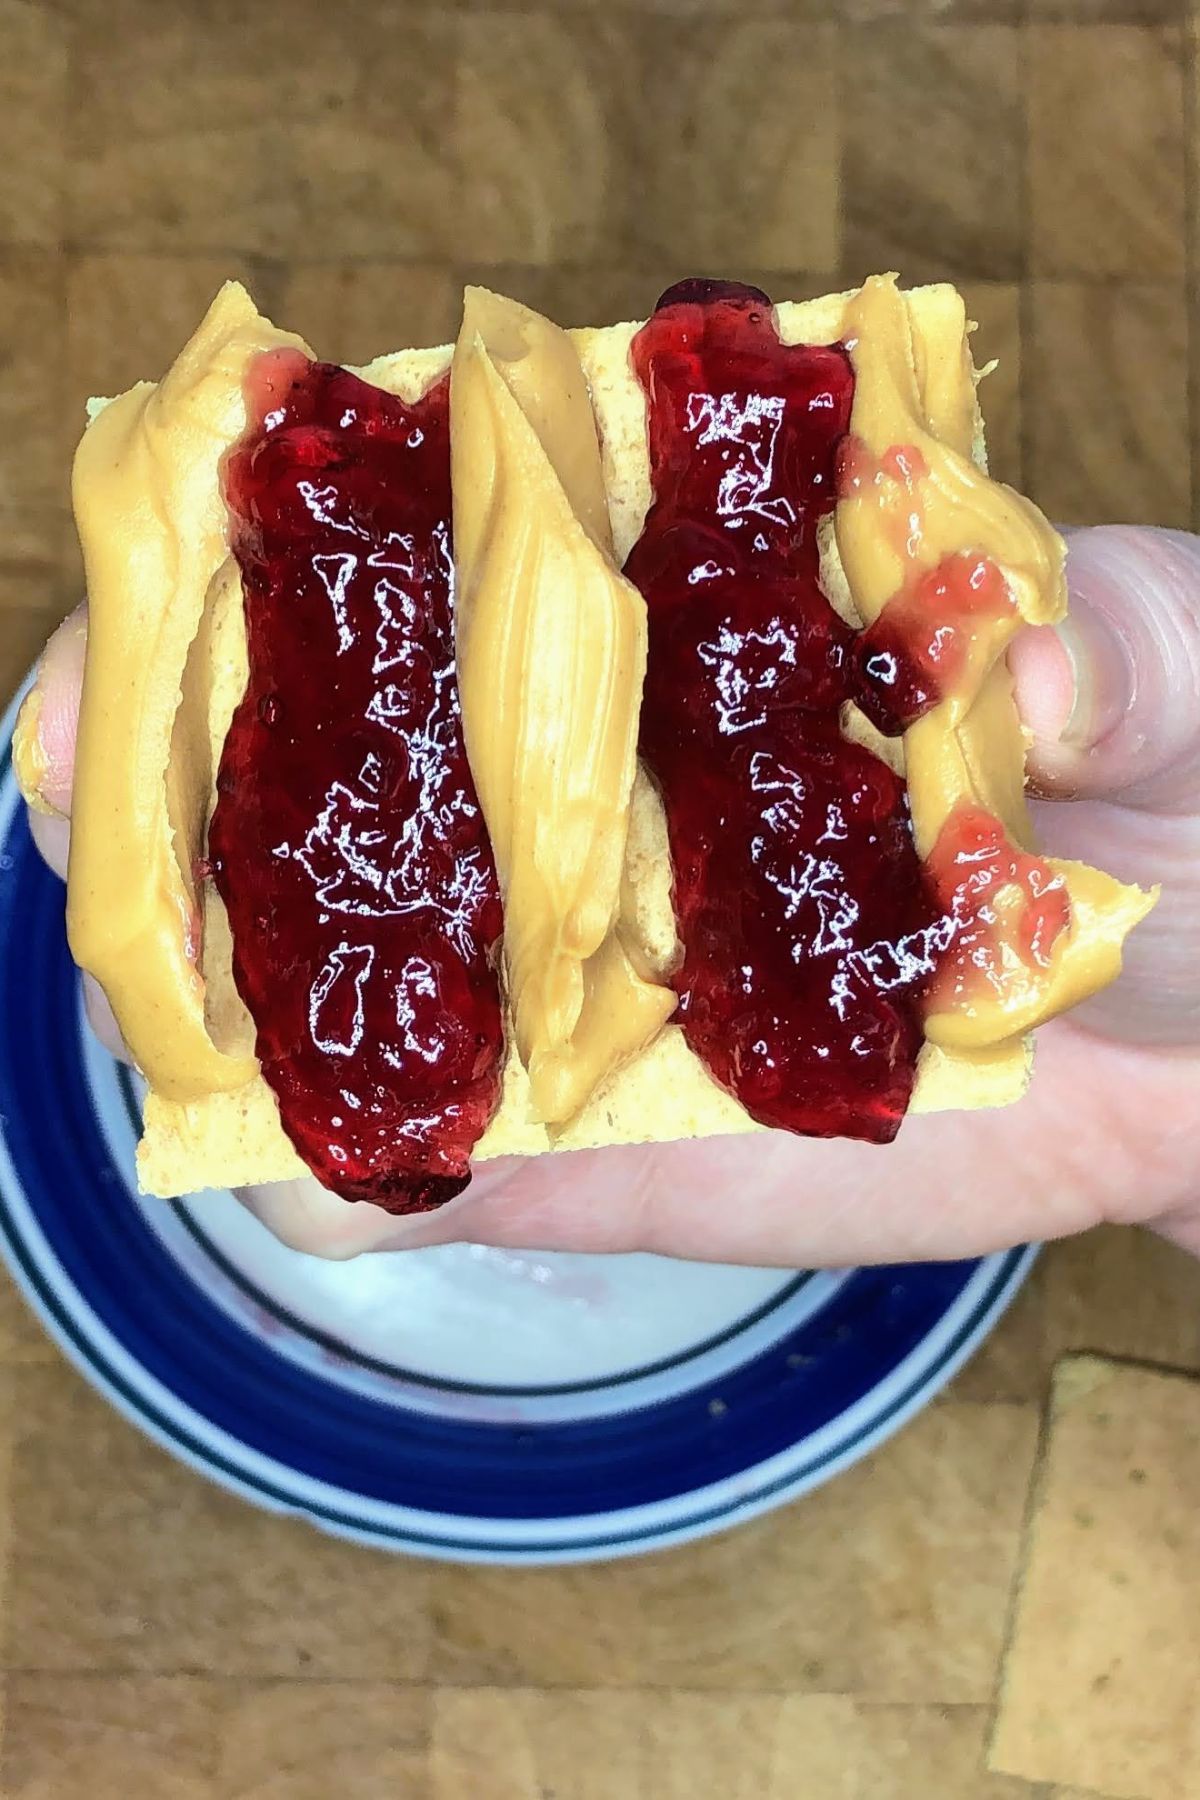 Graham cracker with layers of peanut butter and jelly on it.